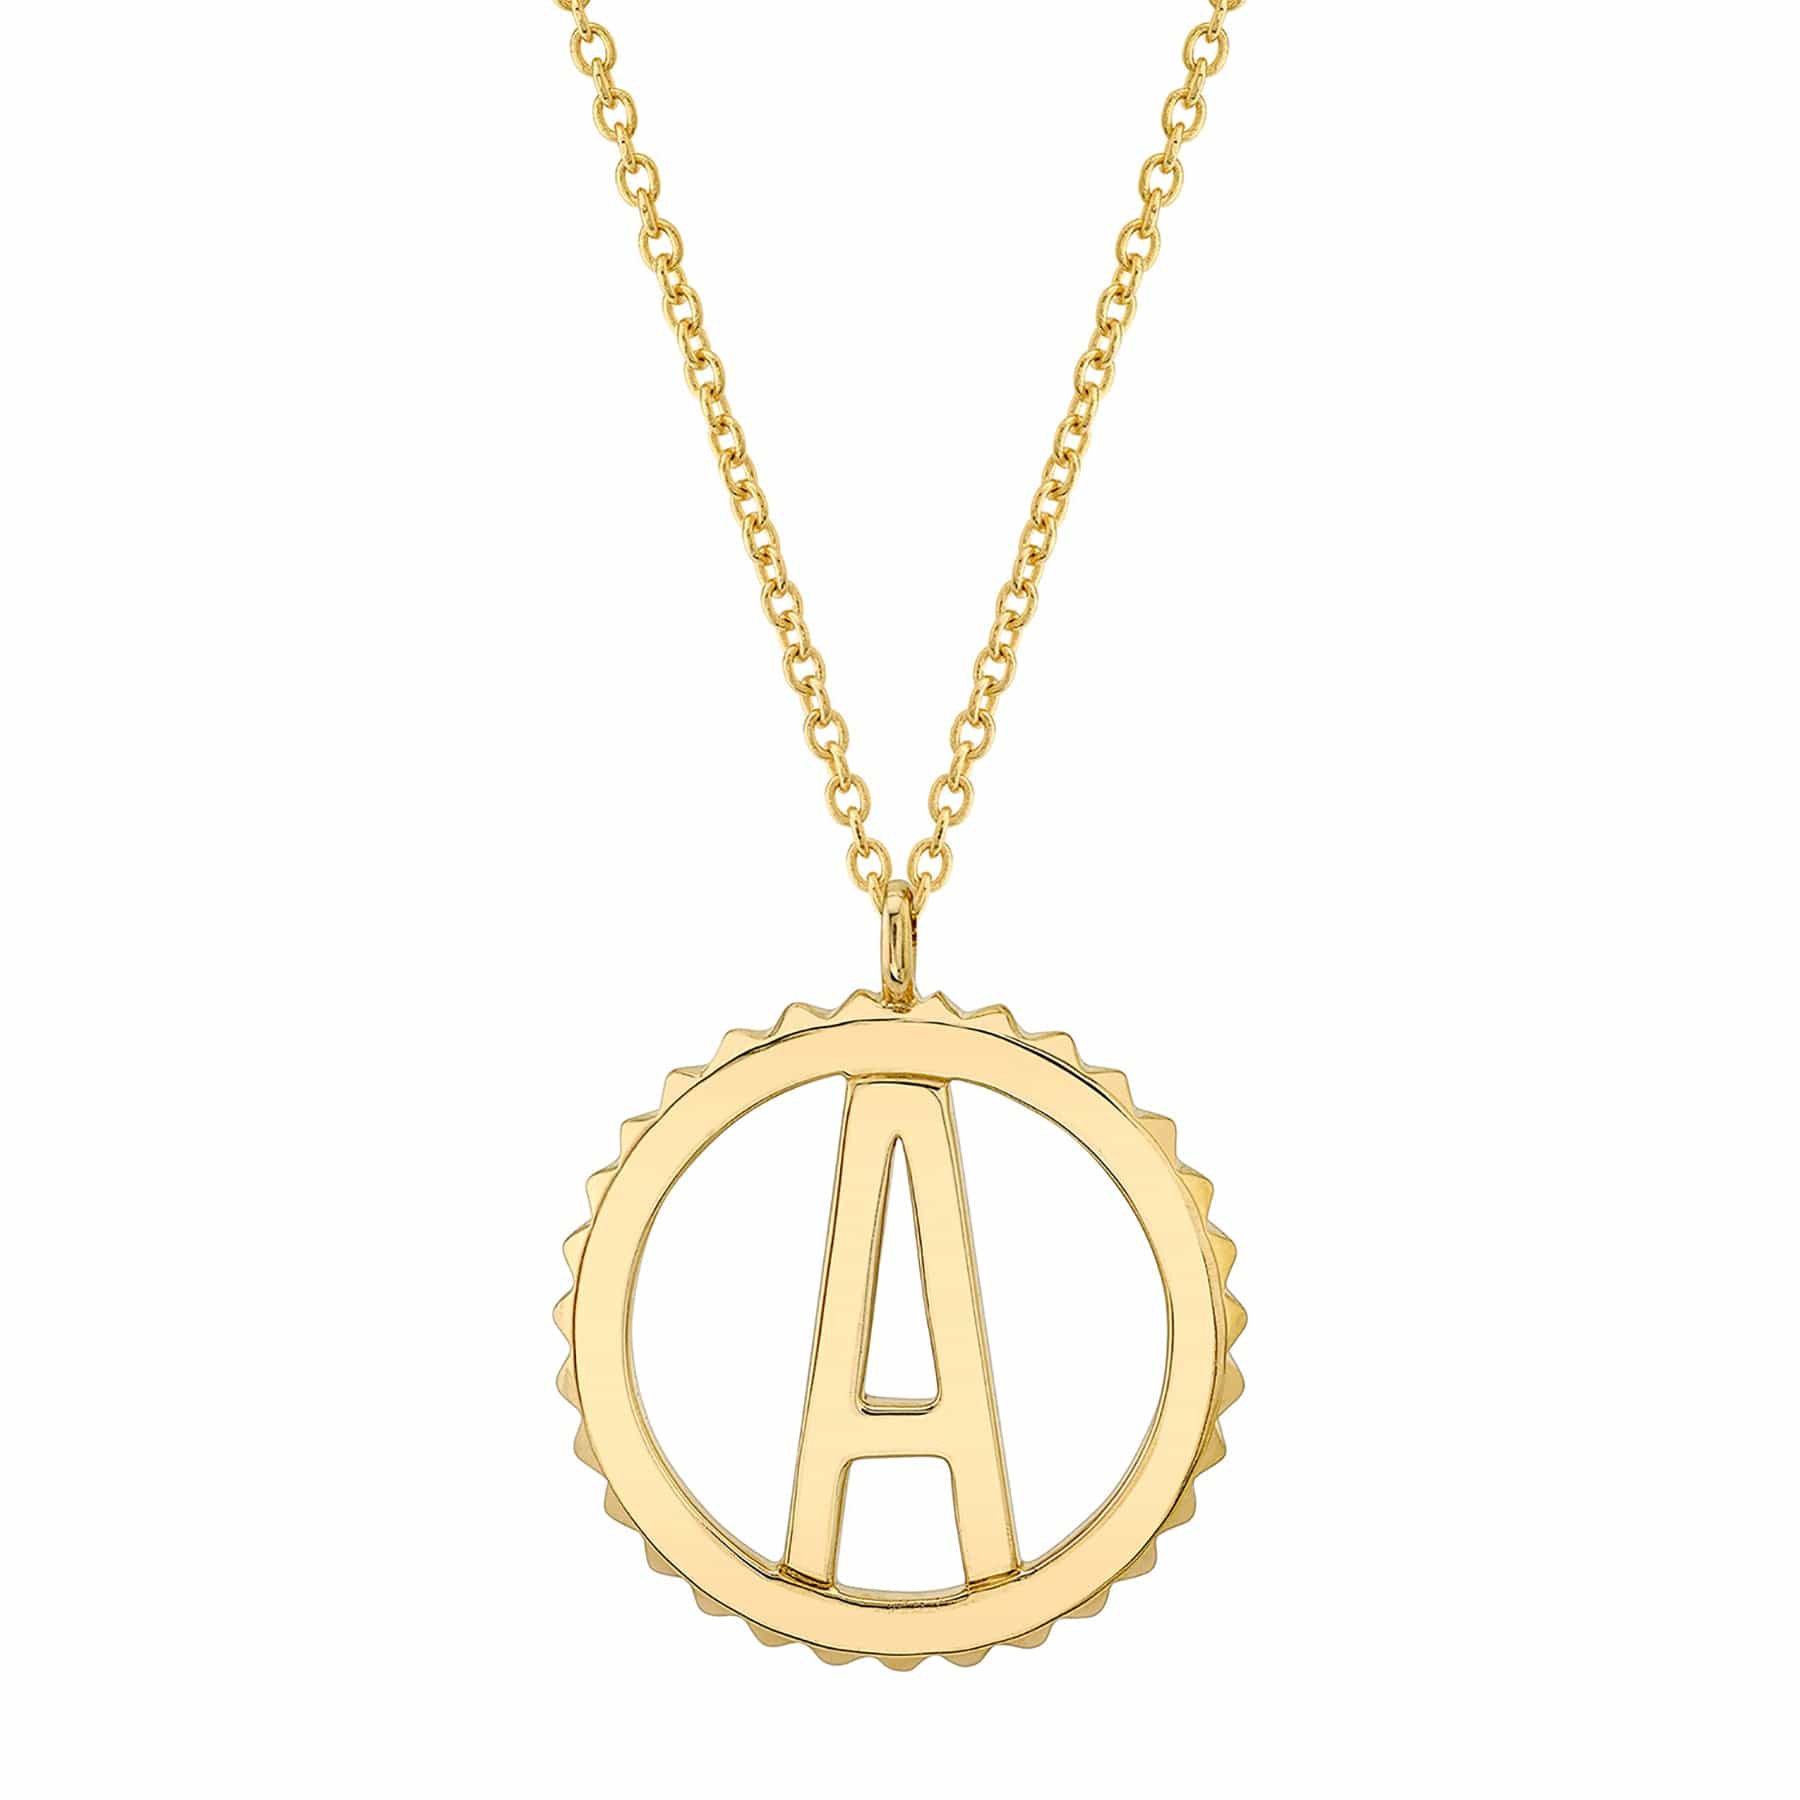 MICHAEL M Necklaces 14K Yellow Gold / A Tetra Initial Medallion P366YG